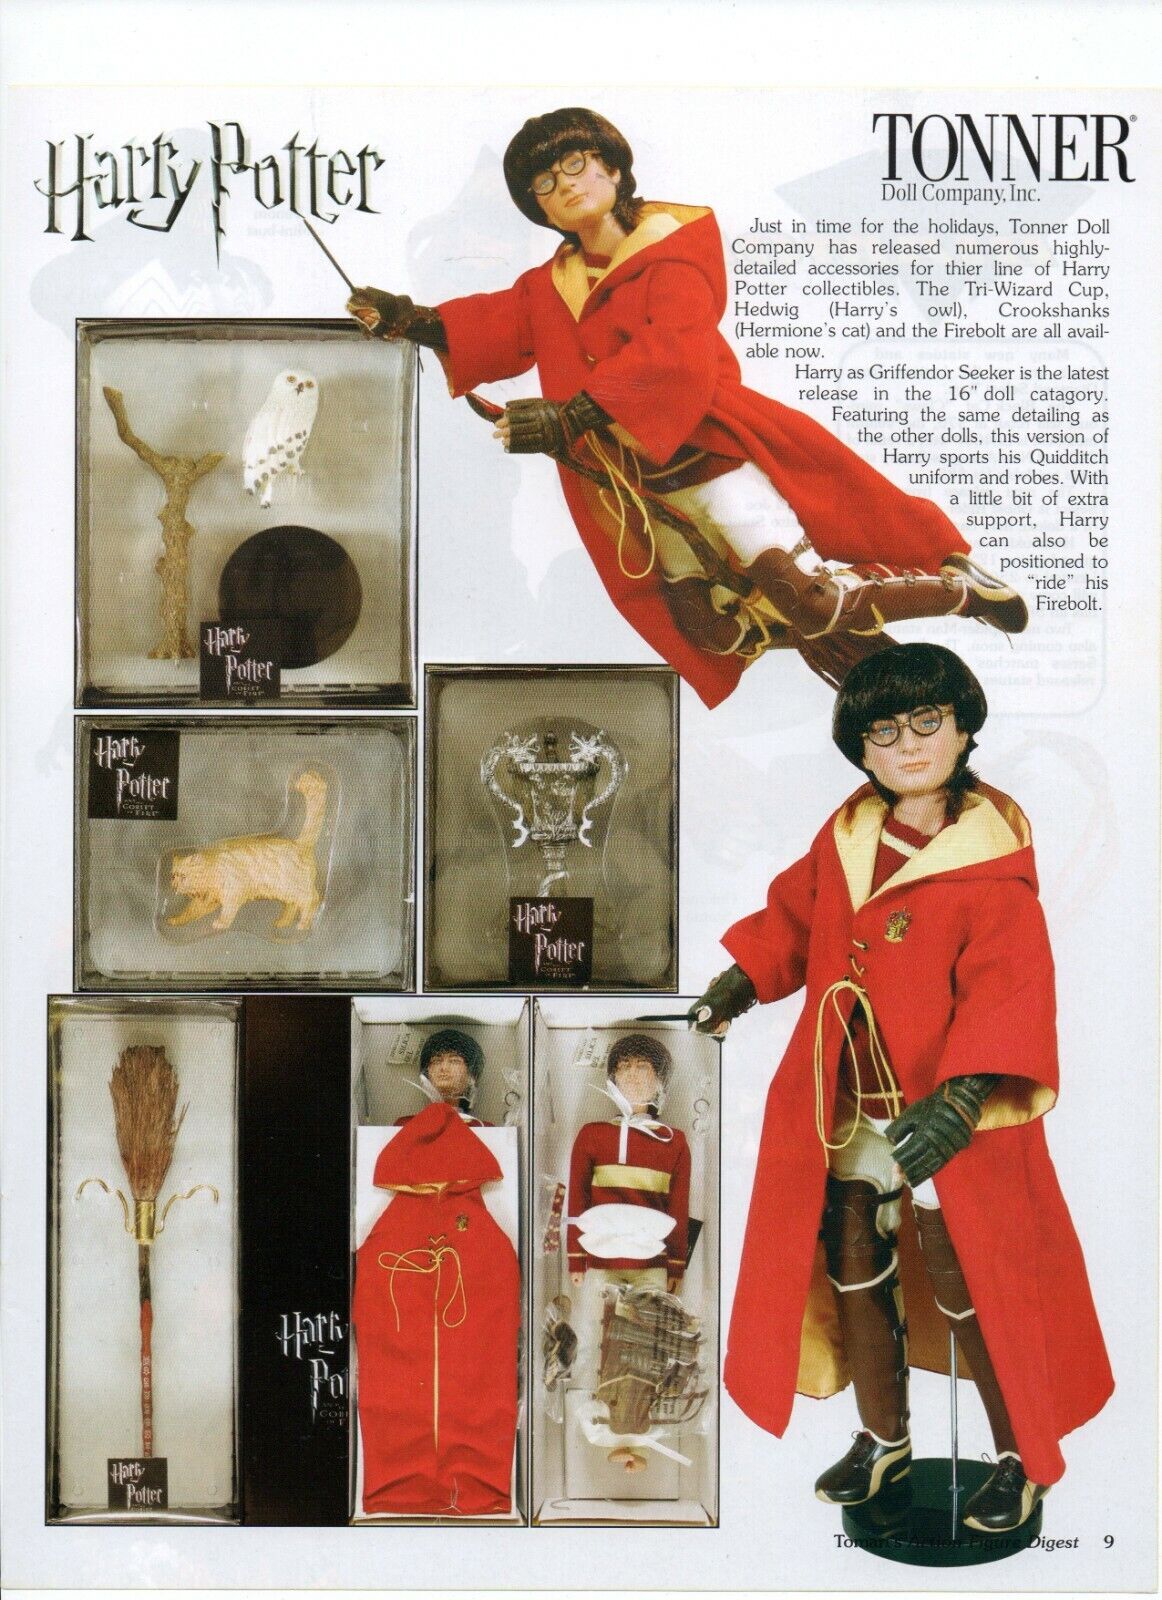 Harry Potter Tonner Doll Company Action Figures - Vintage 2006 Toys Print Ad